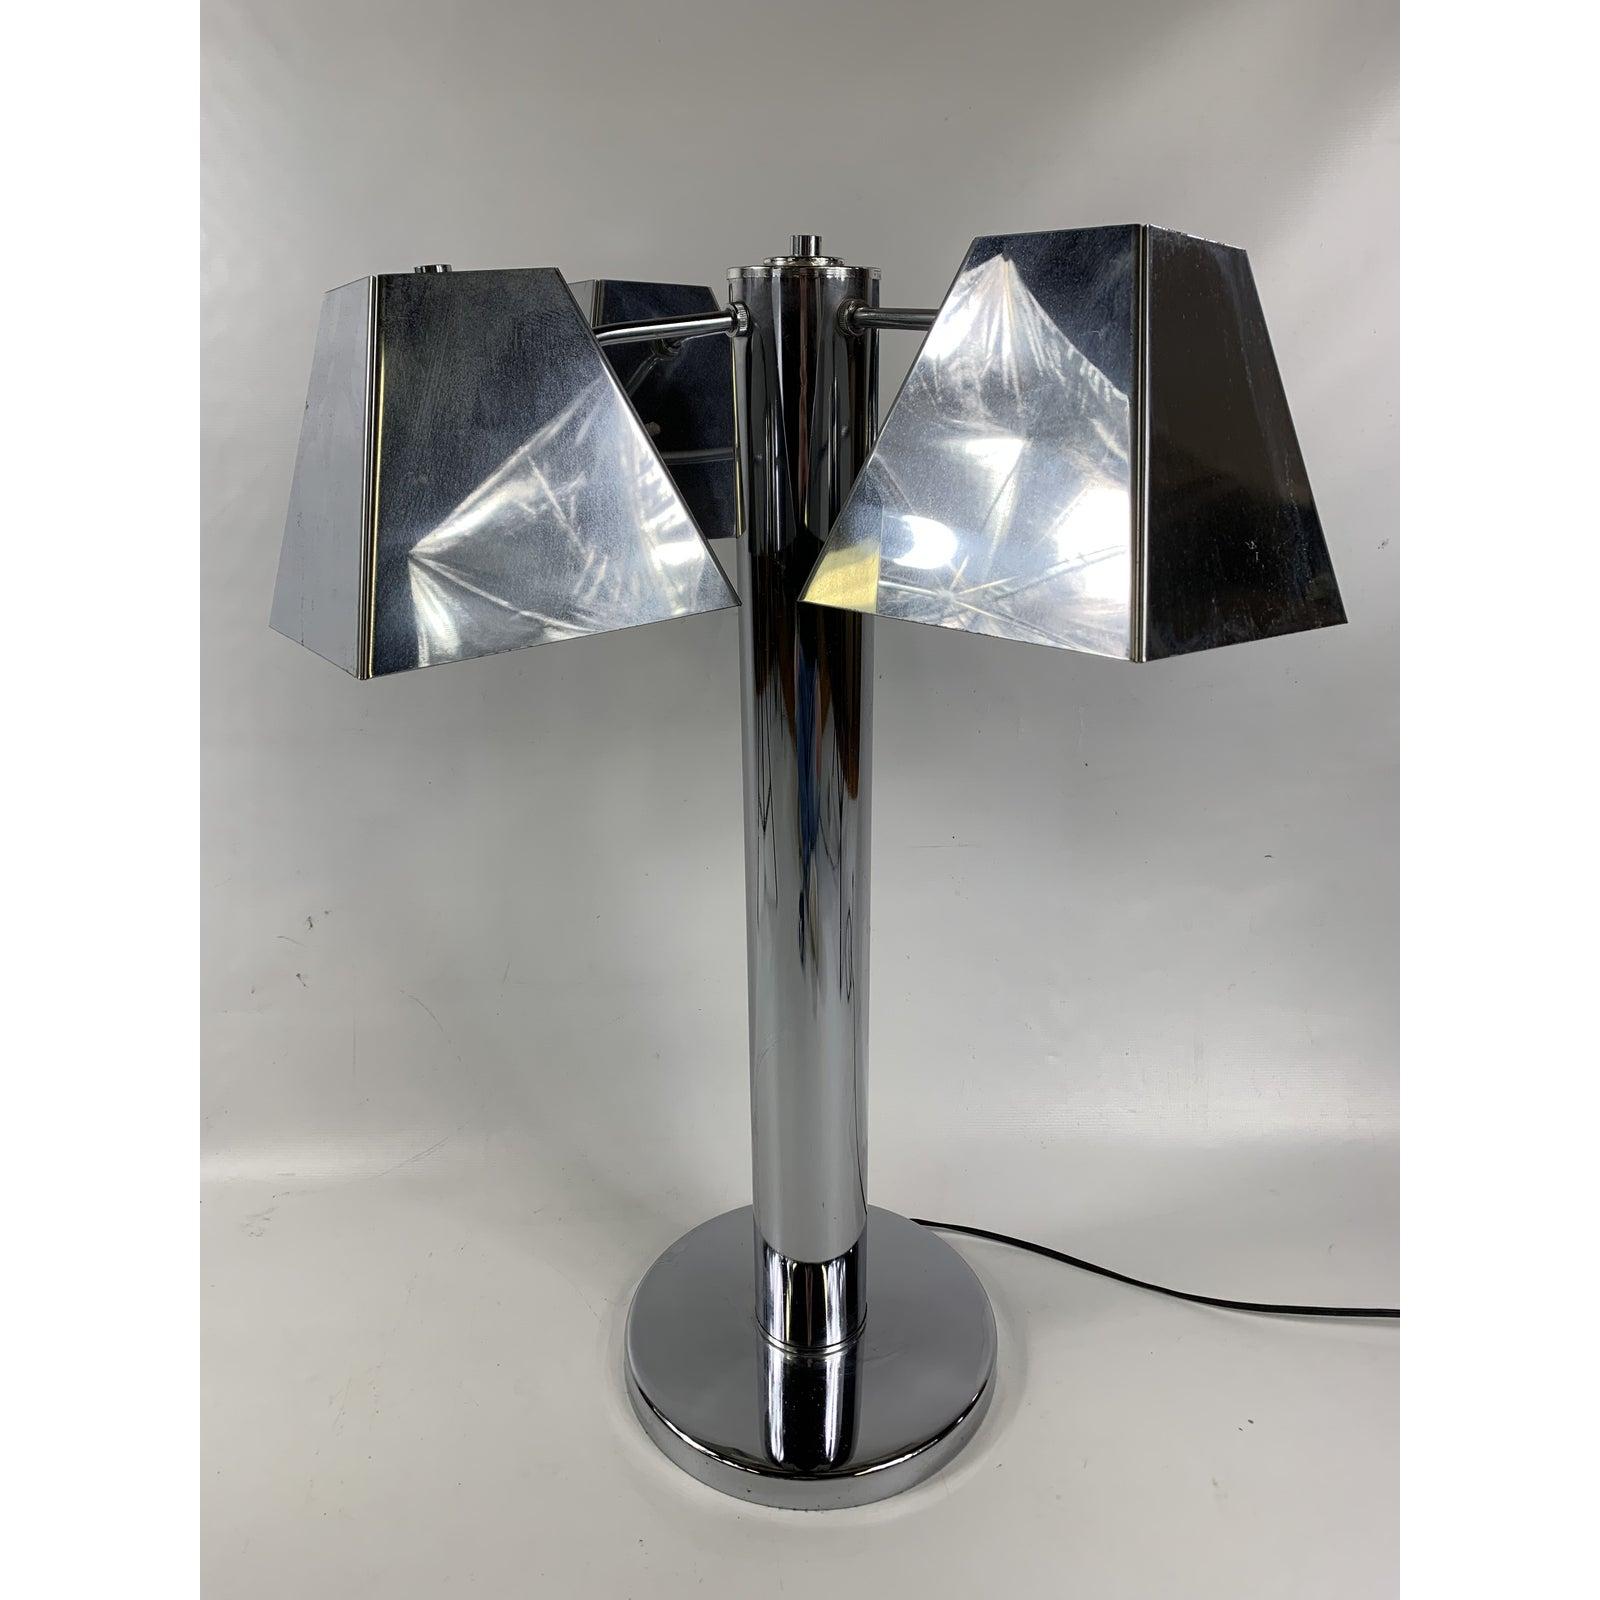 This is a very nice unique monumental chrome table lamp. The lamp is very large and very well made. Piece was made in the 1960s. Lamp takes 4 bulbs.